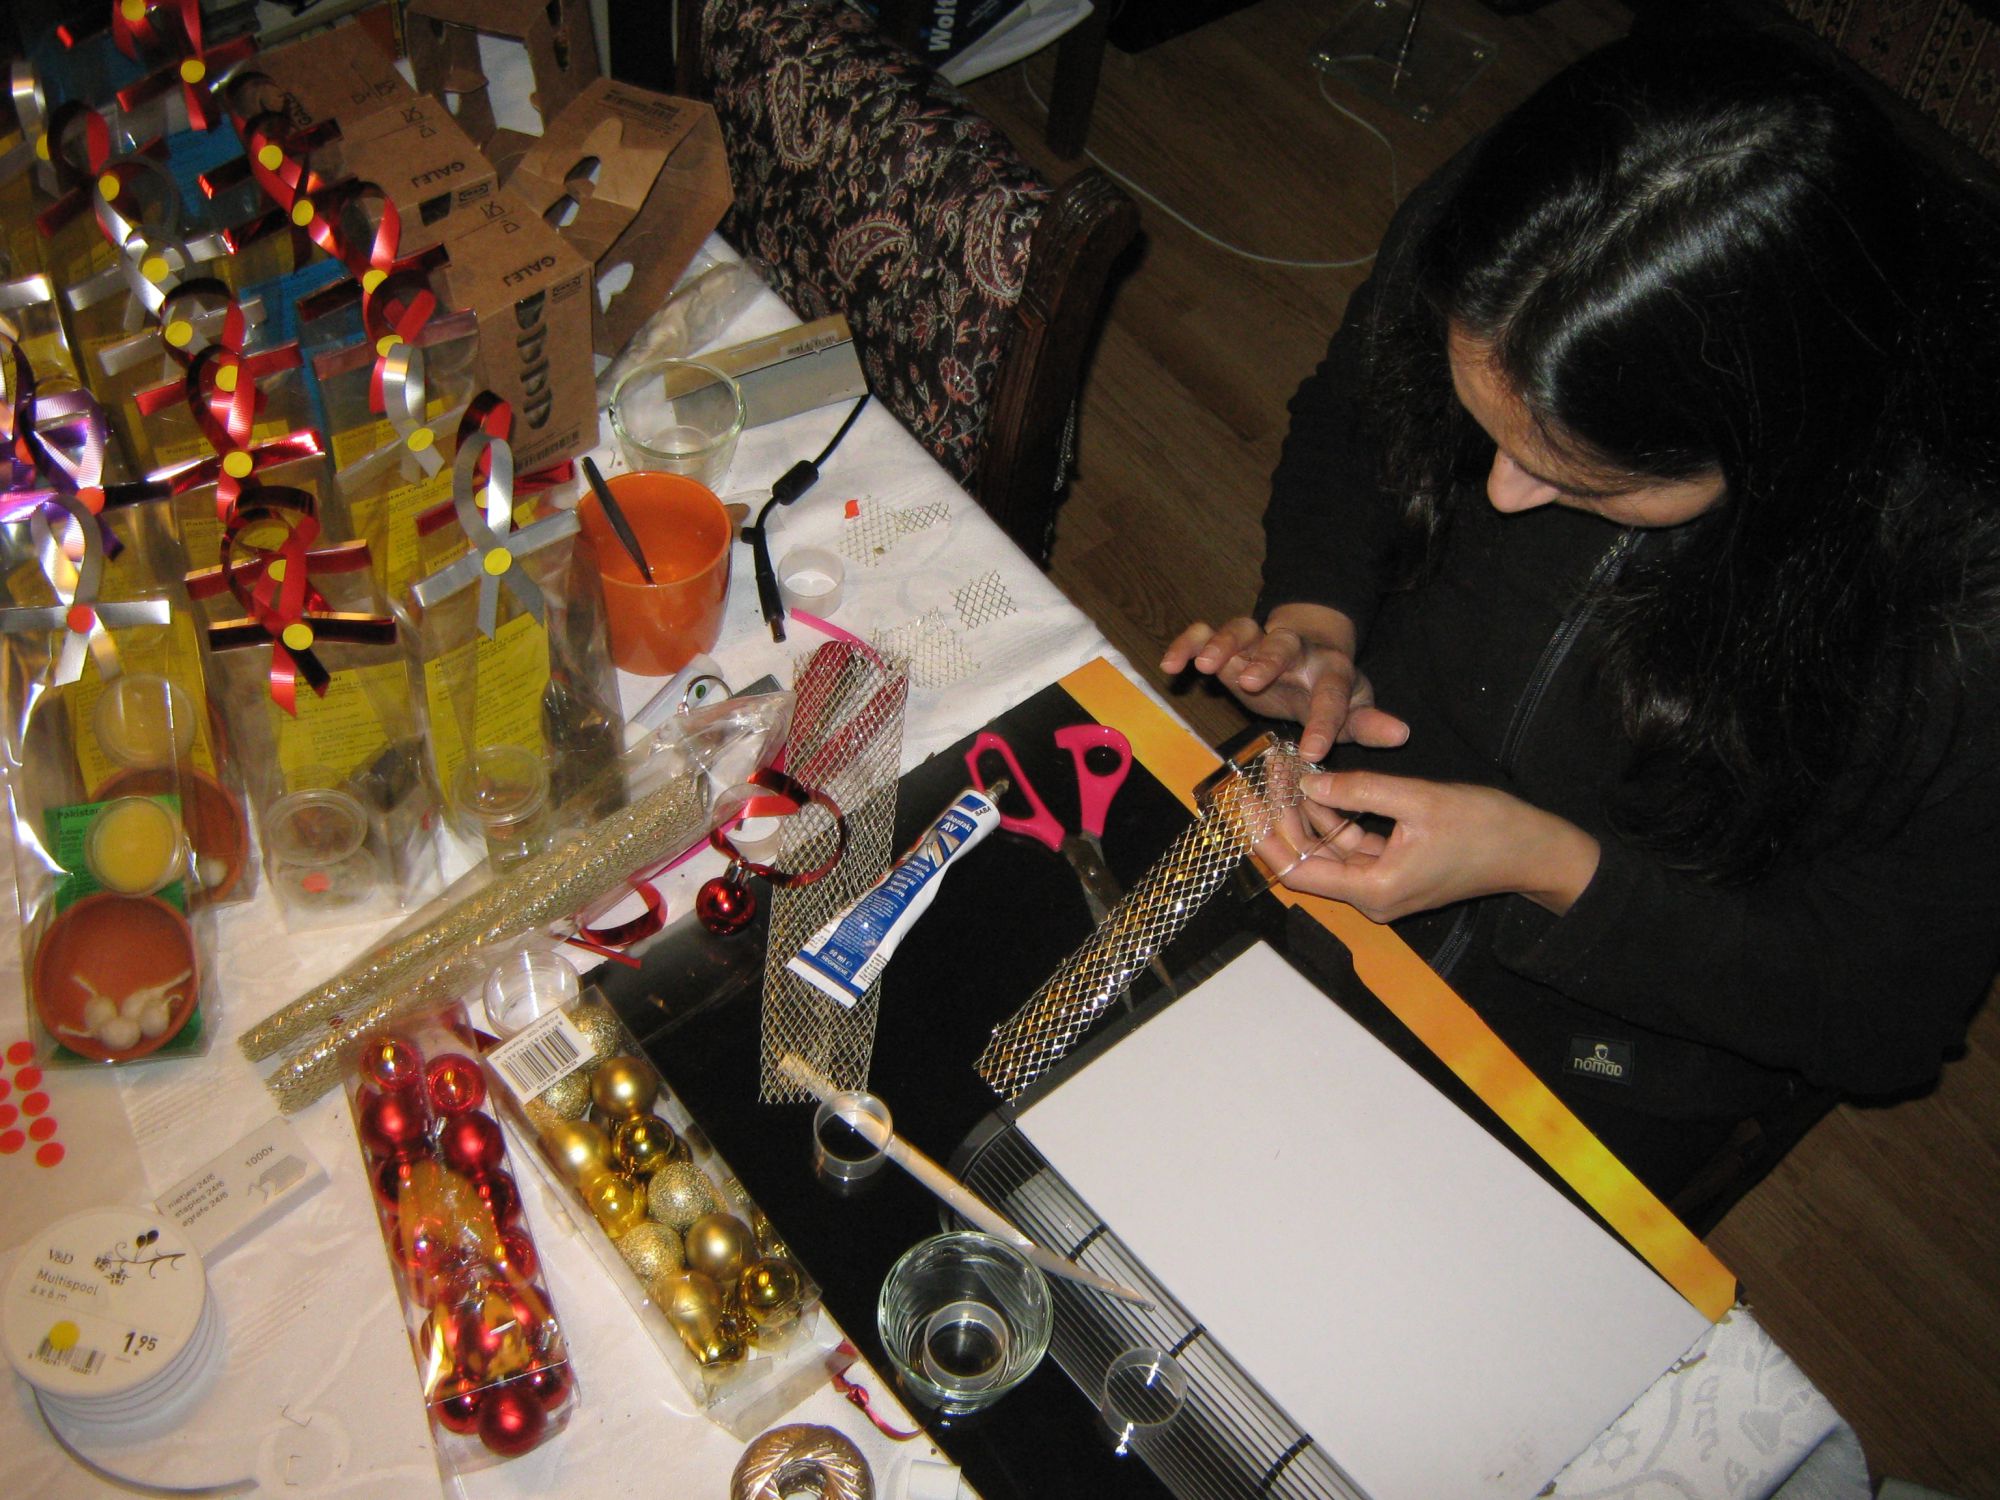 Preparations for the Pre-Xmas Pakistan Party